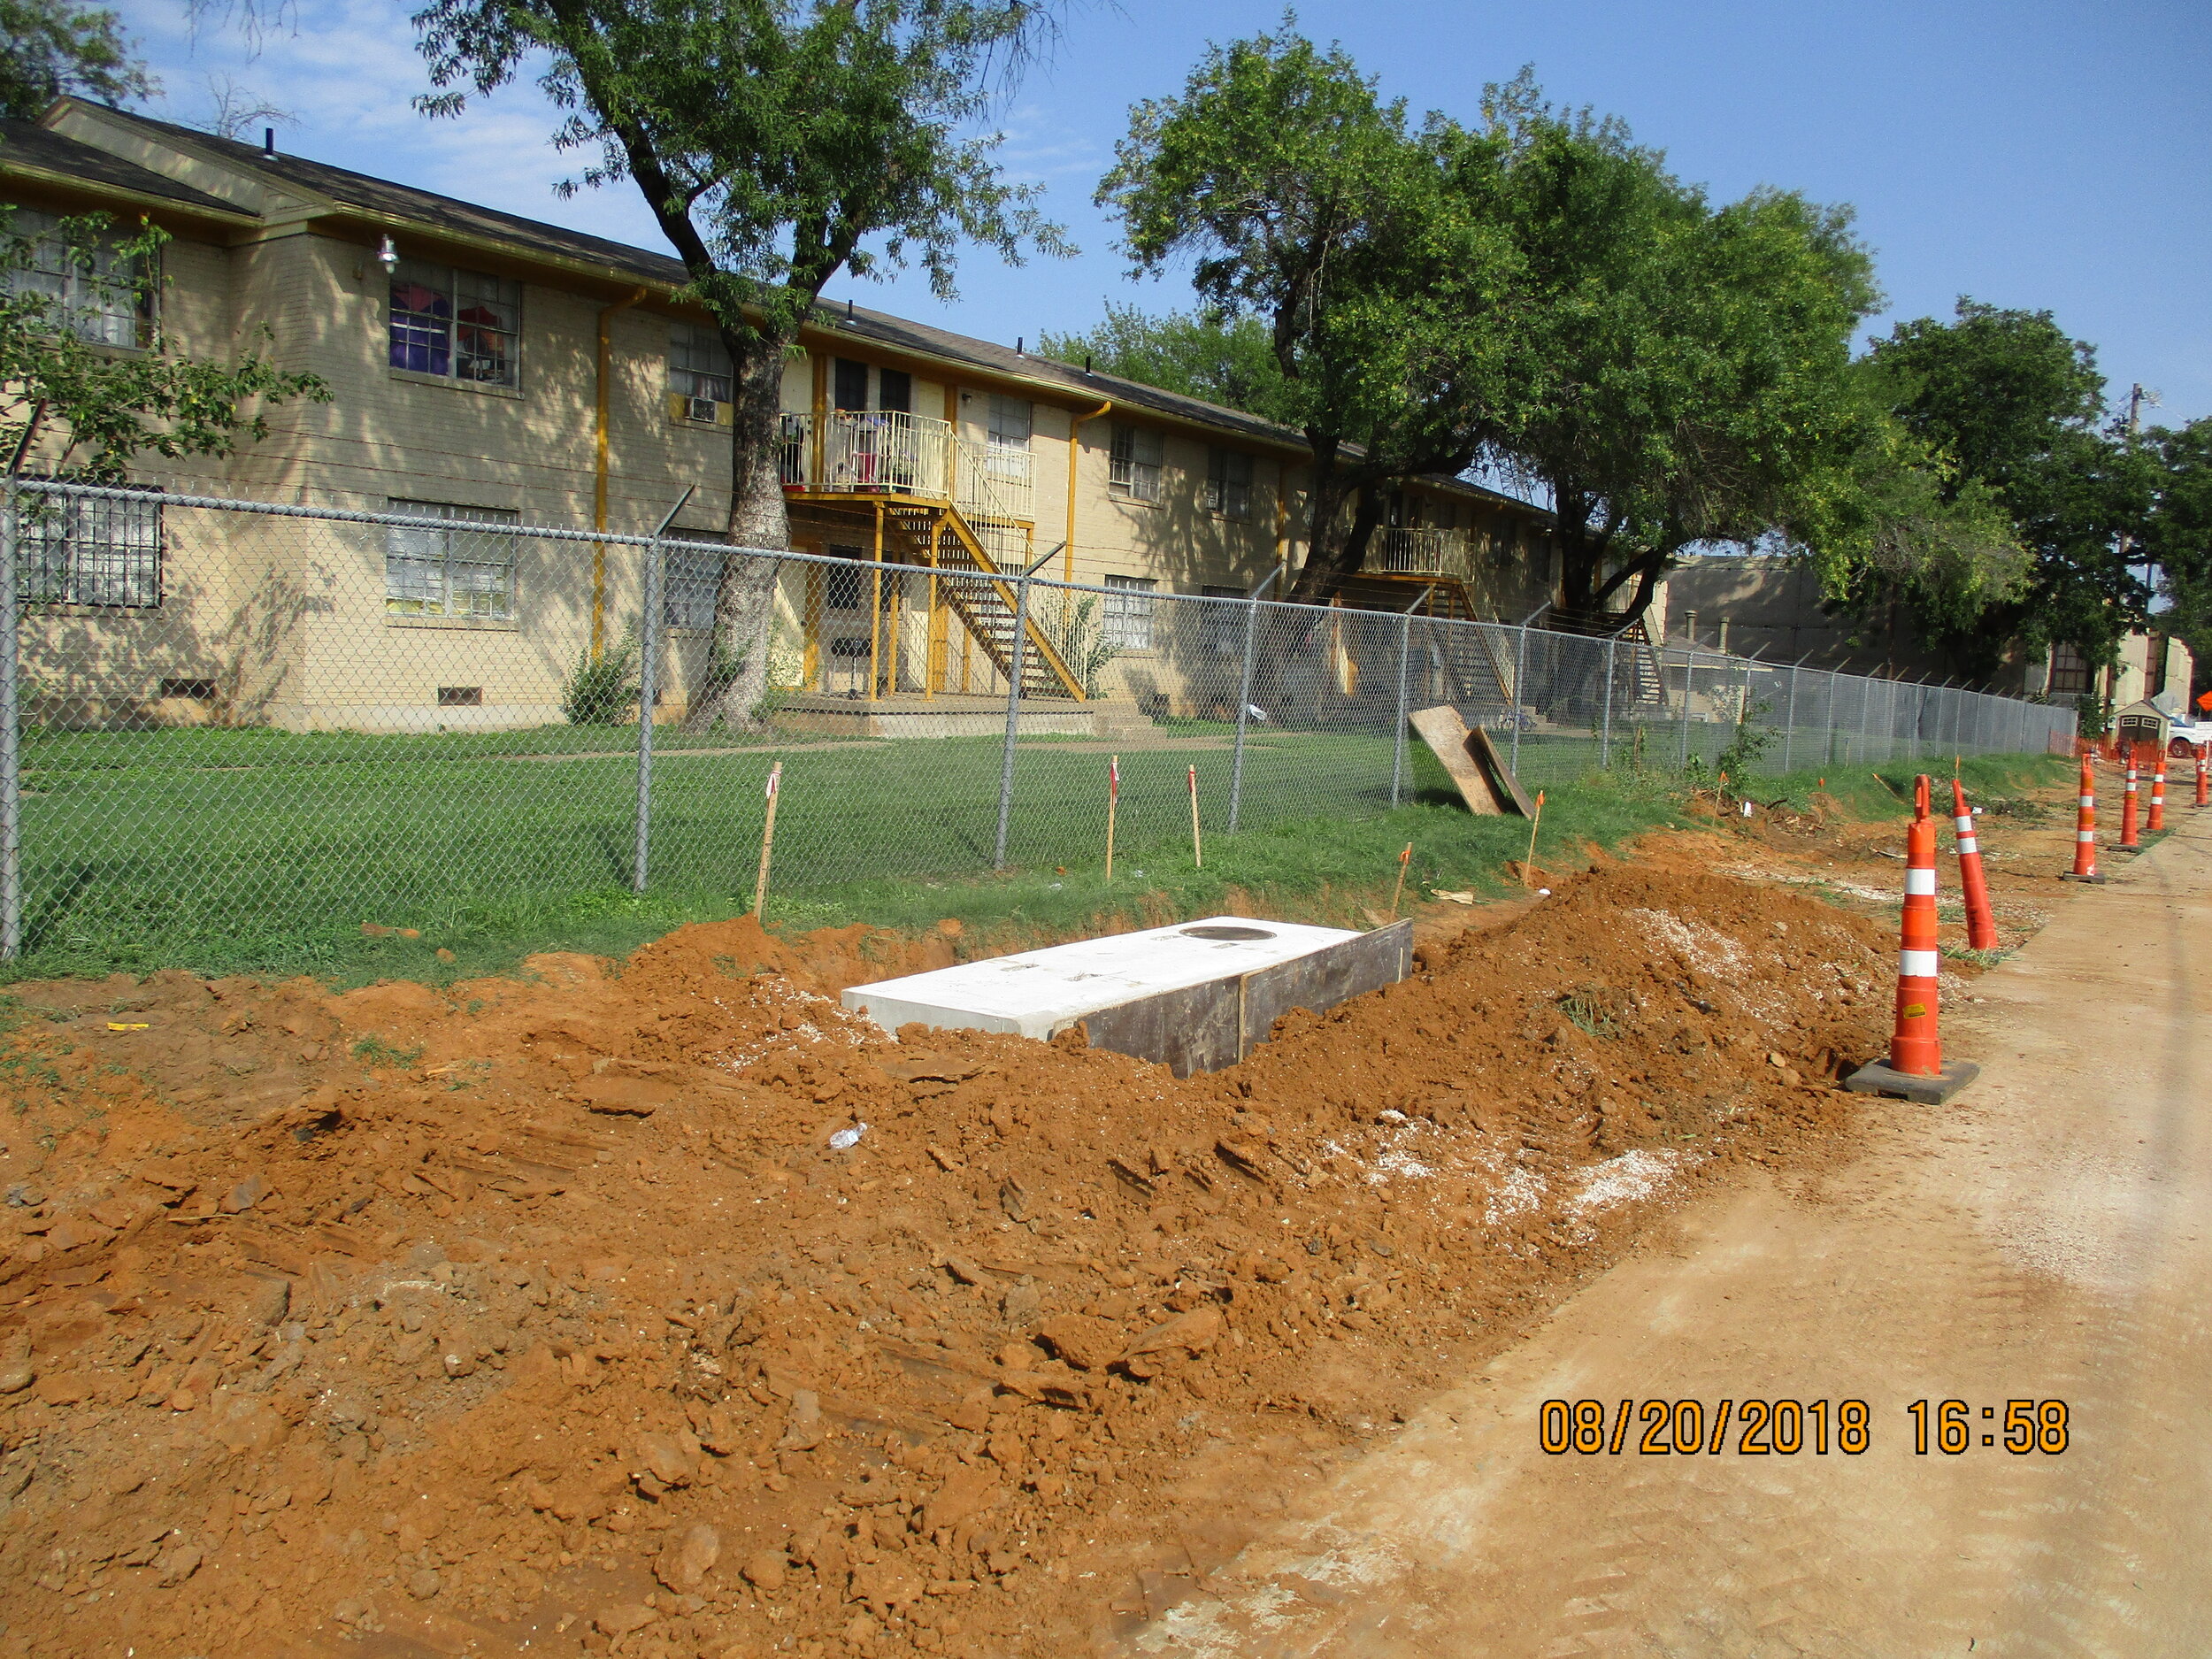 Storm Drain Inlet No. 10 Installed on Barber Avenue